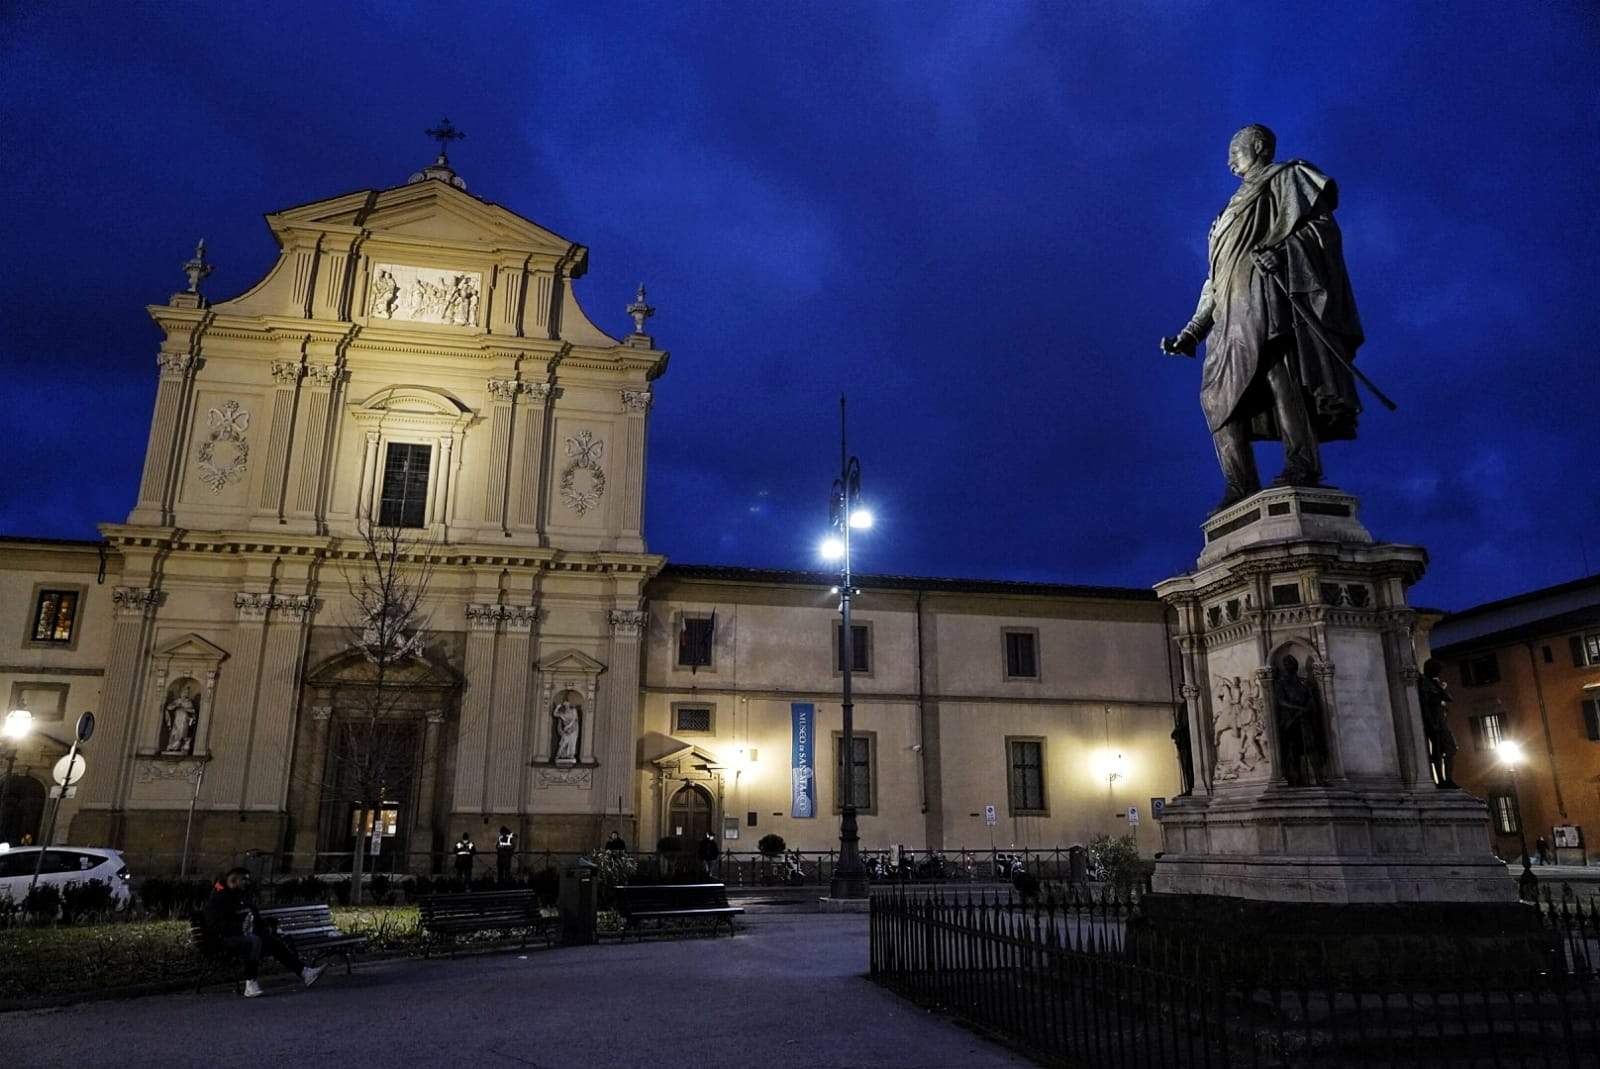 Florence, new lighting in San Marco square completed